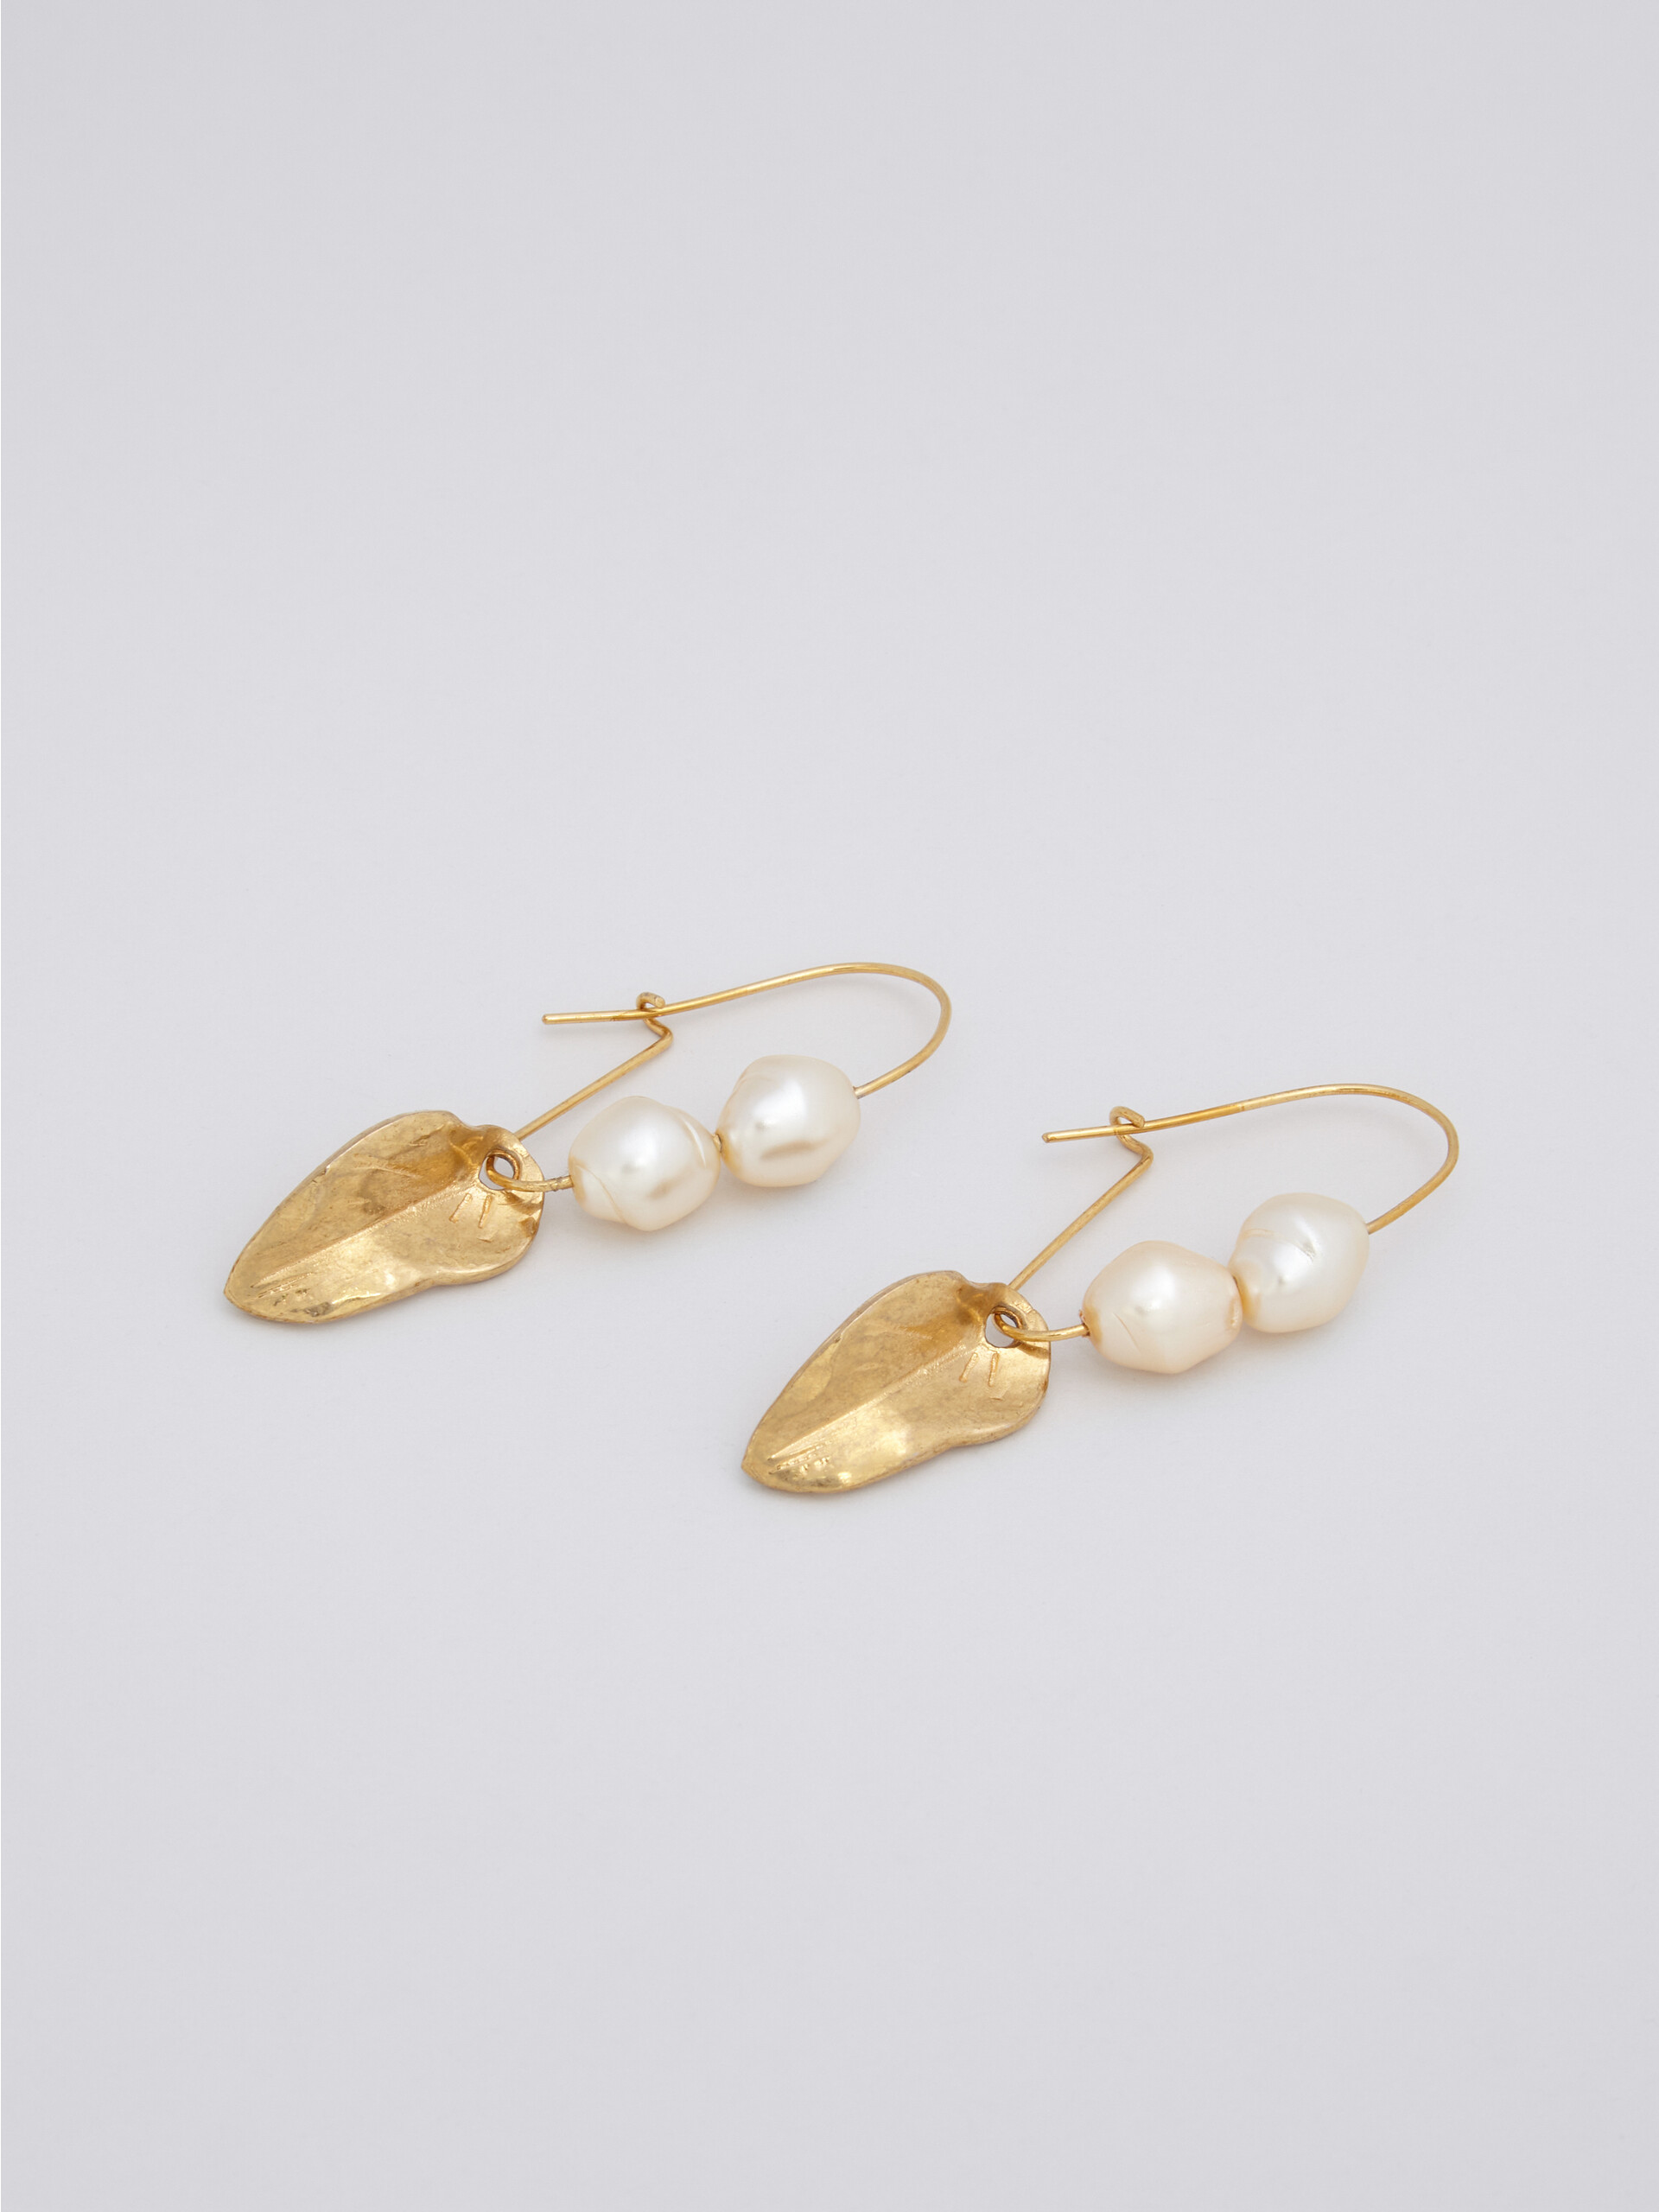 NATURE leverback earrings in gold-tone metal with pearls and leaf - Earrings - Image 3